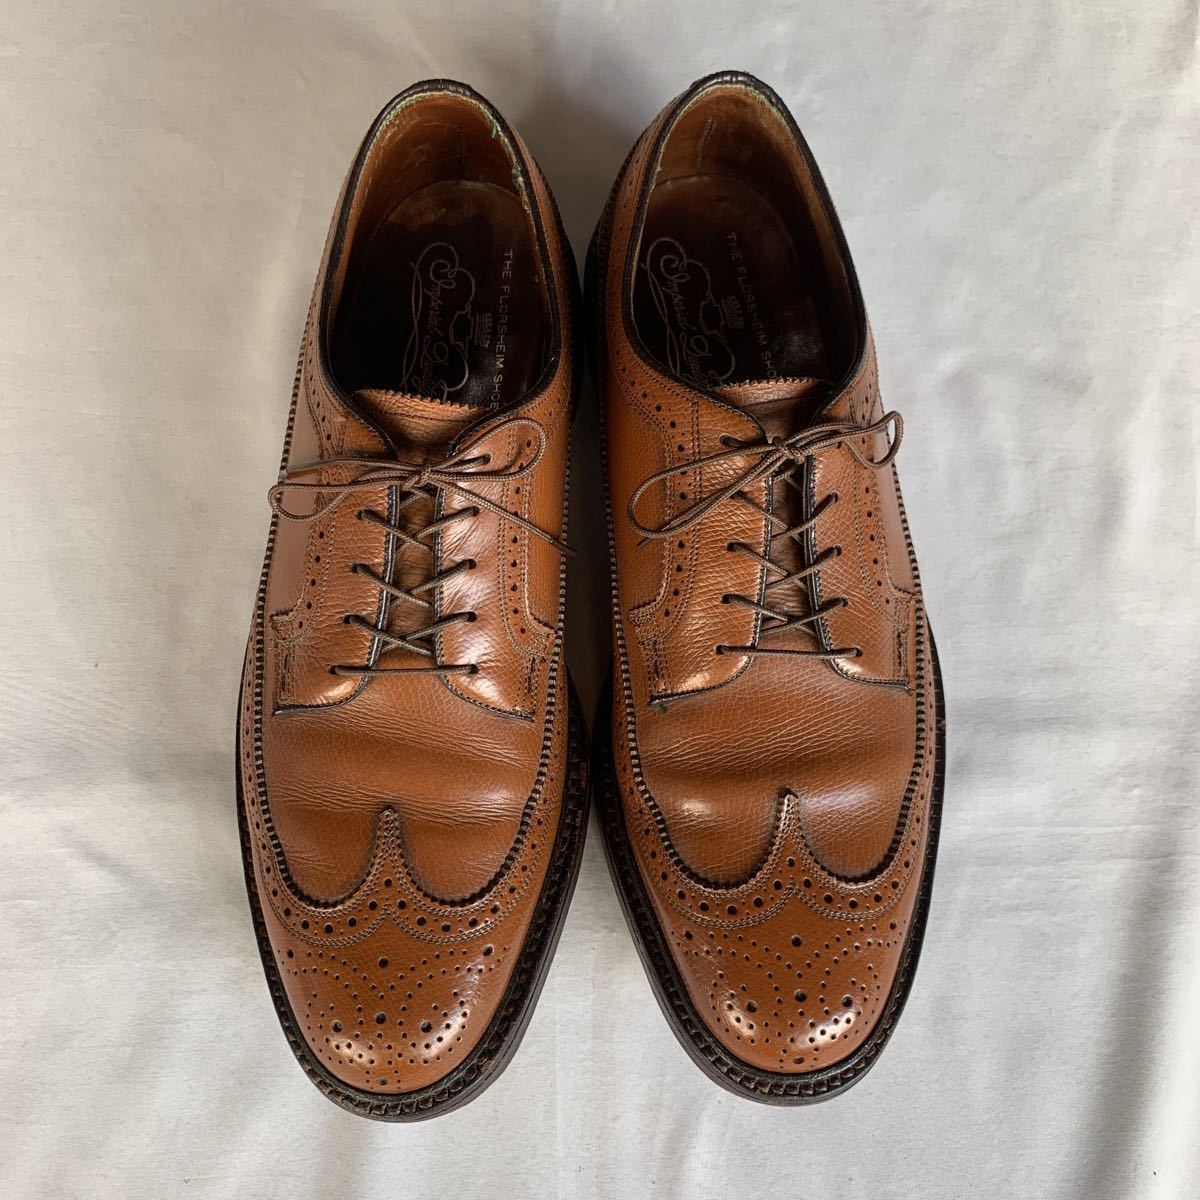 70s FLORSHEIM KENMOOR LEATHER SHOES FLORSHEIM IMPERIAL ヴィンテージ フローシャイム ケンムール 革靴 インペリアル 緑窓 60s 送料無料_画像2